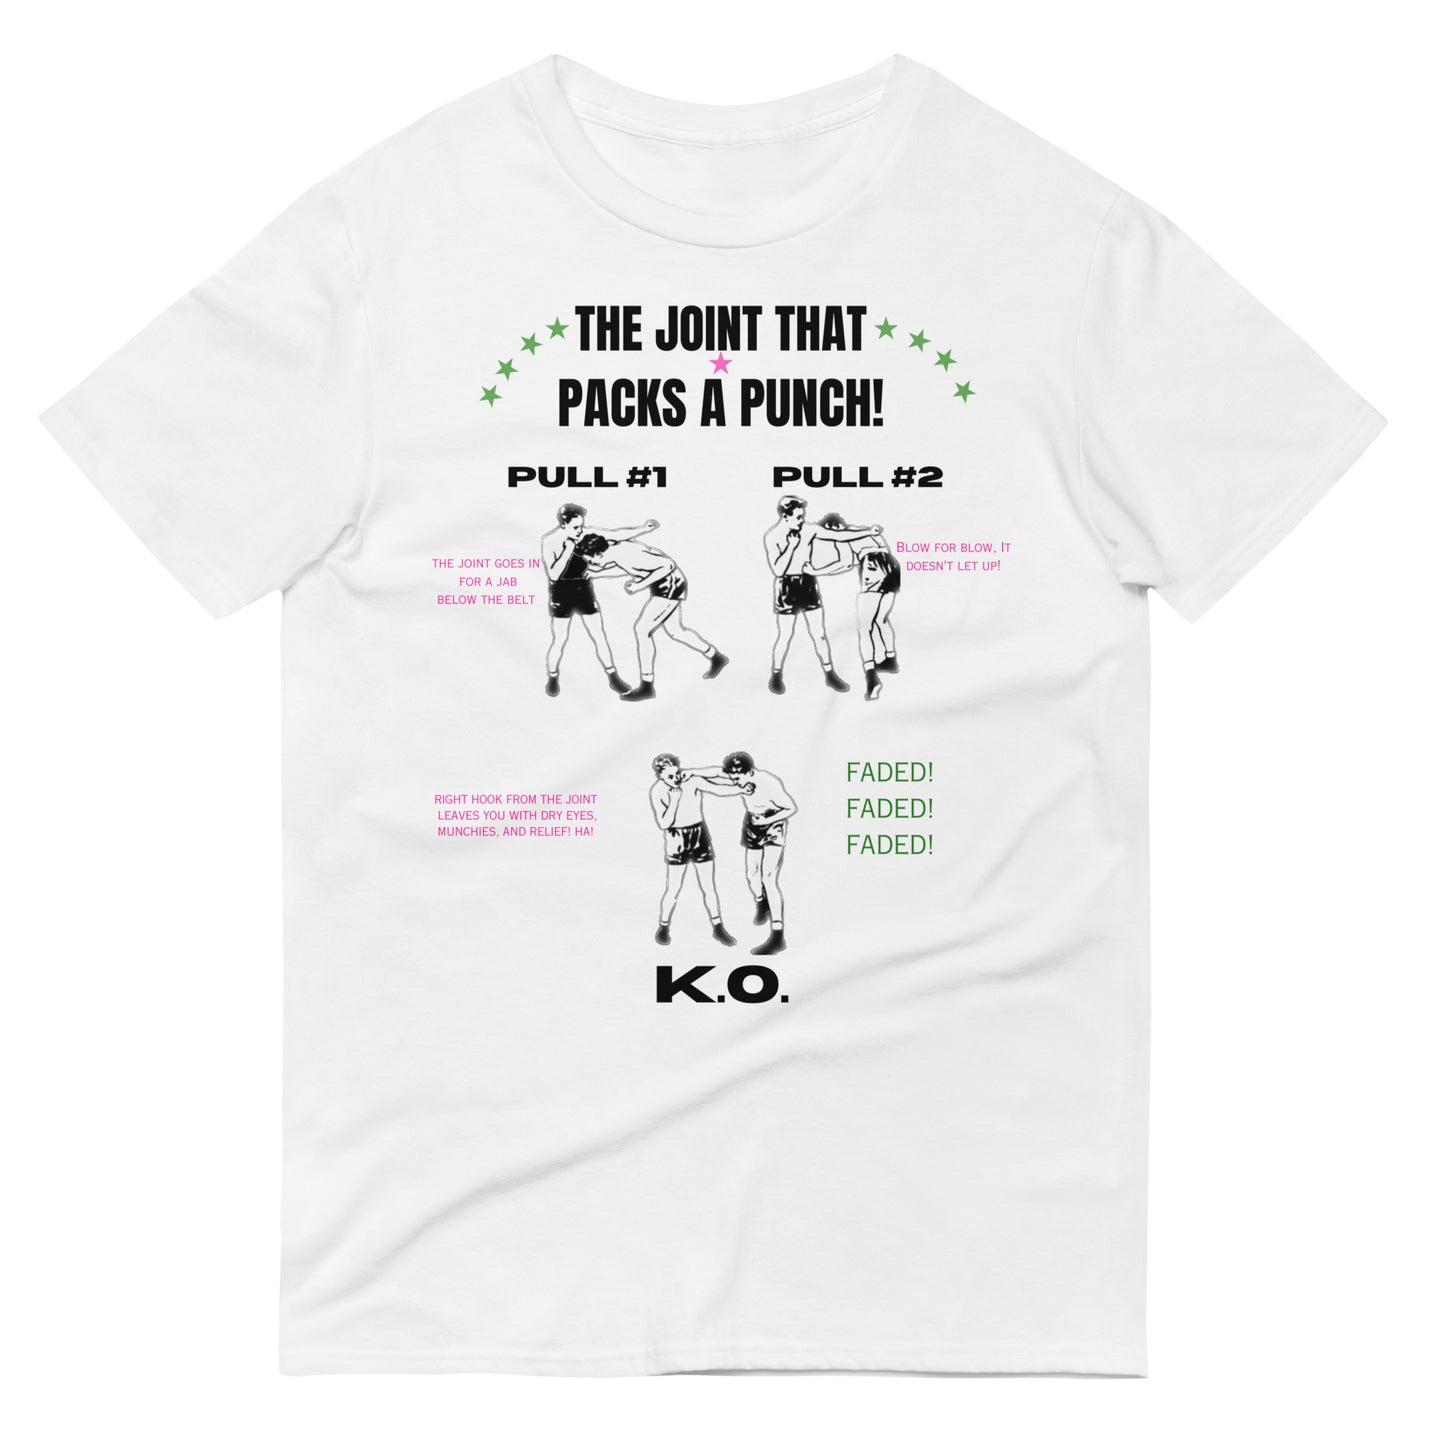 "The Joint That Packs a Punch!" Tee - White